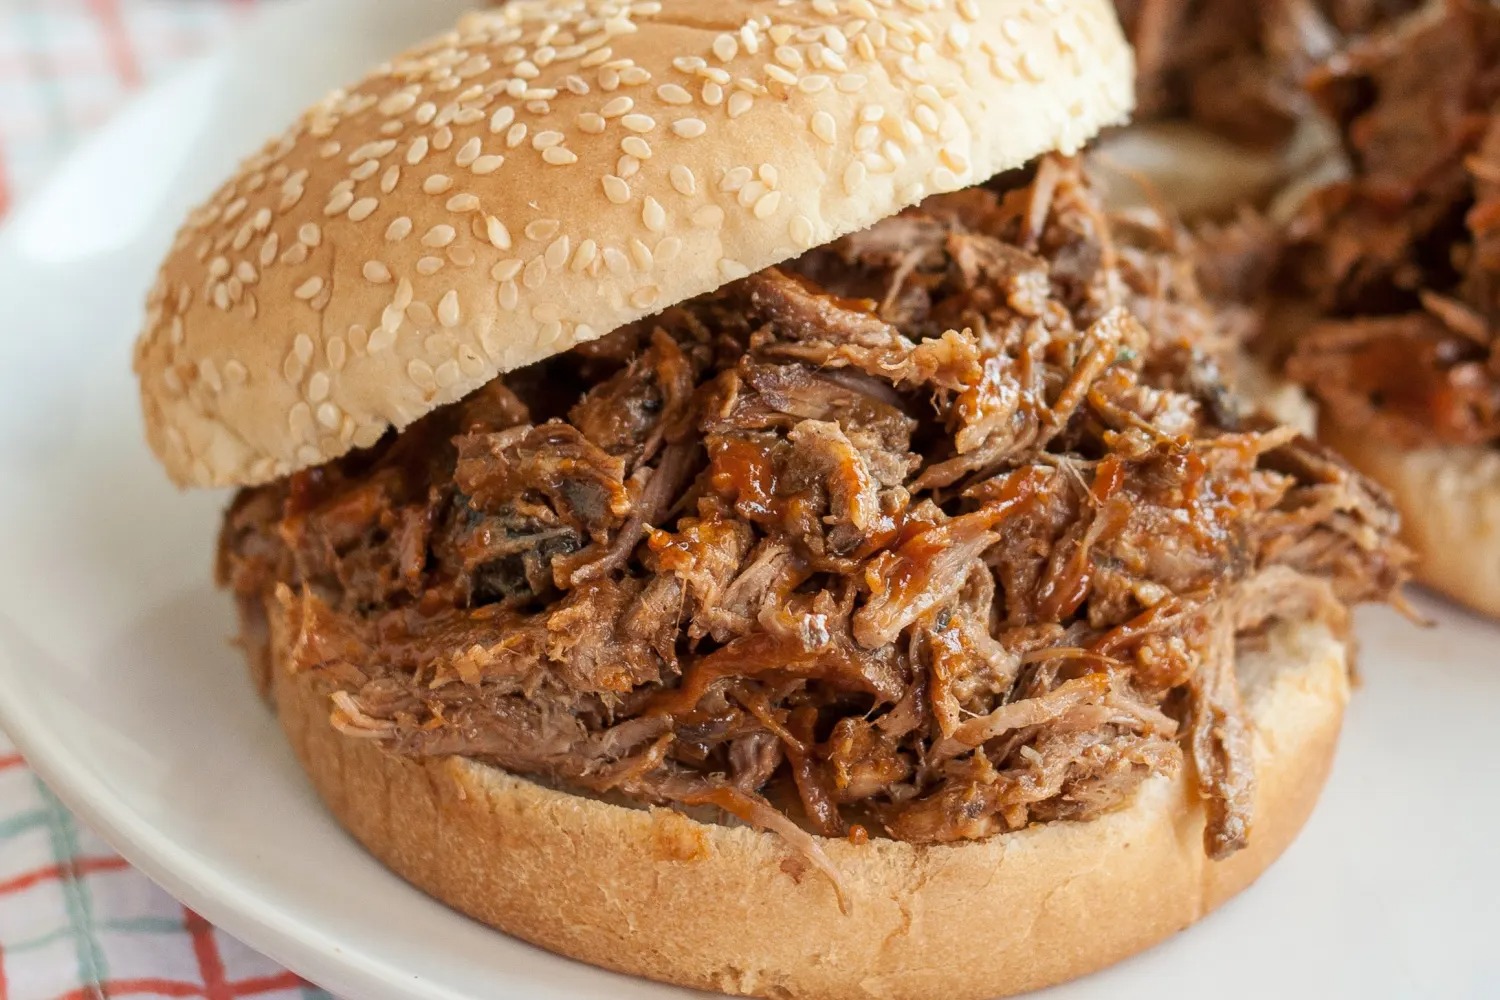 If you see something on the menu and can’t find at least one or two other items that the ingredients could be used in, don’t order it.For example, my restaurant has a pulled pork sandwich. We don’t use the pork for anything else. Since it’s not ordered too frequently, it’s not fresh and the product you’re eating might be days or weeks old. It’s not going to get you sick, but it definitely won’t be as fresh as the other things on the menu.